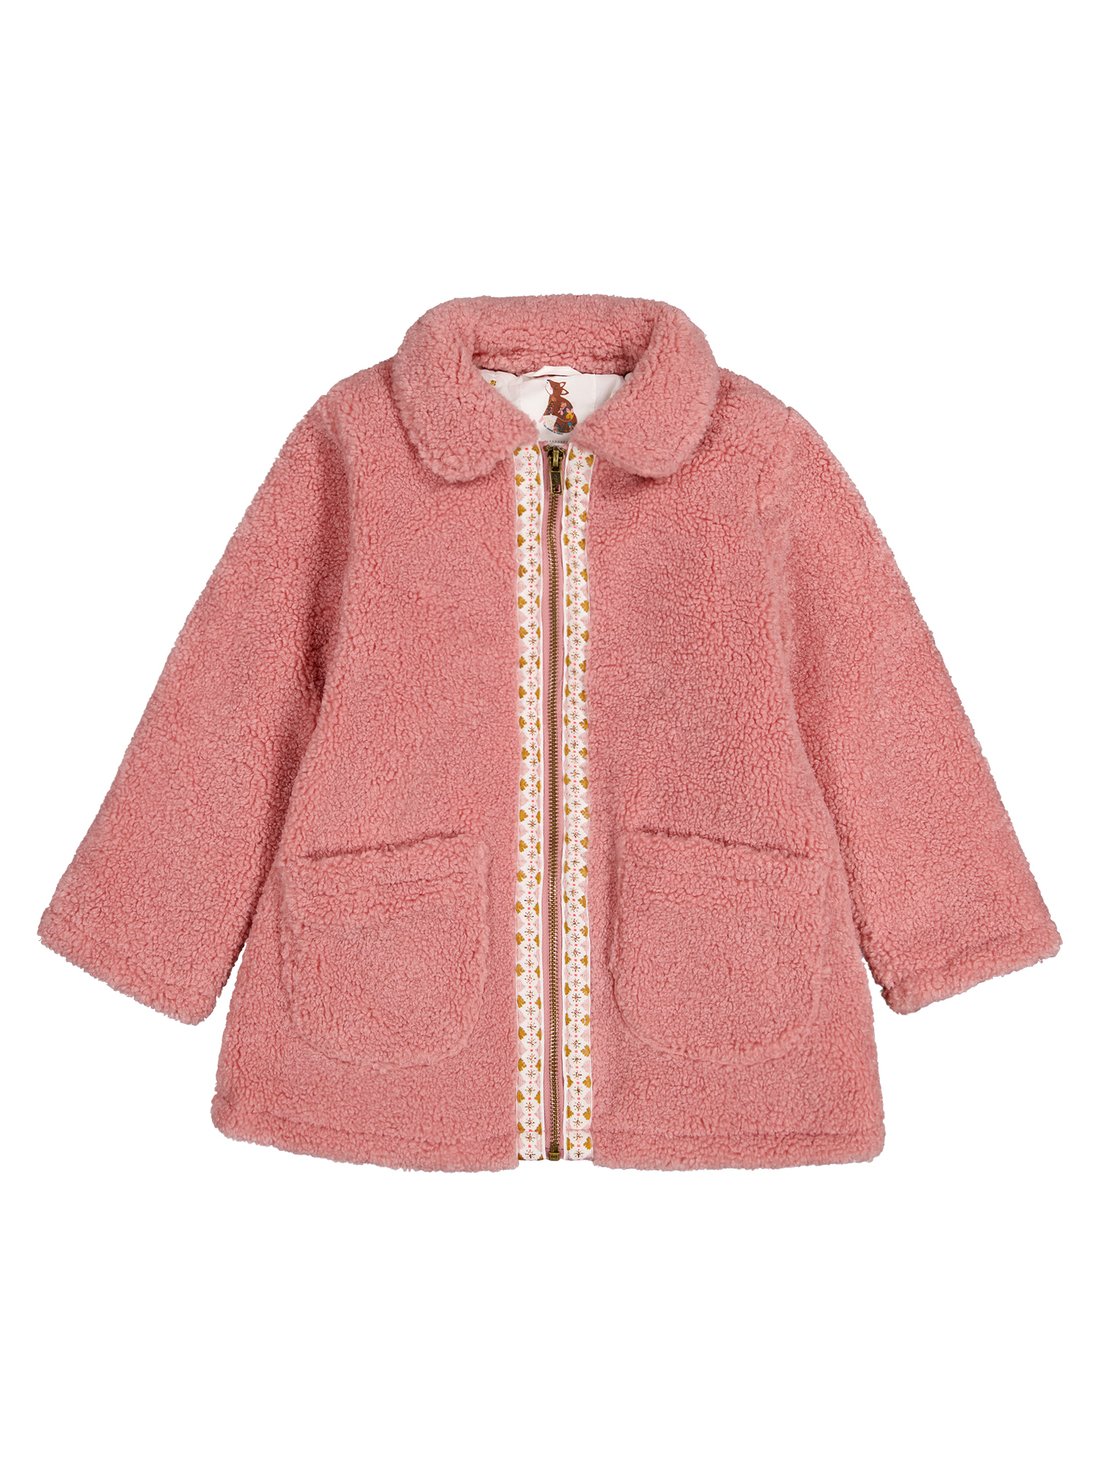 Old rose Coat for children for future mother (Matière principale : 100% ...